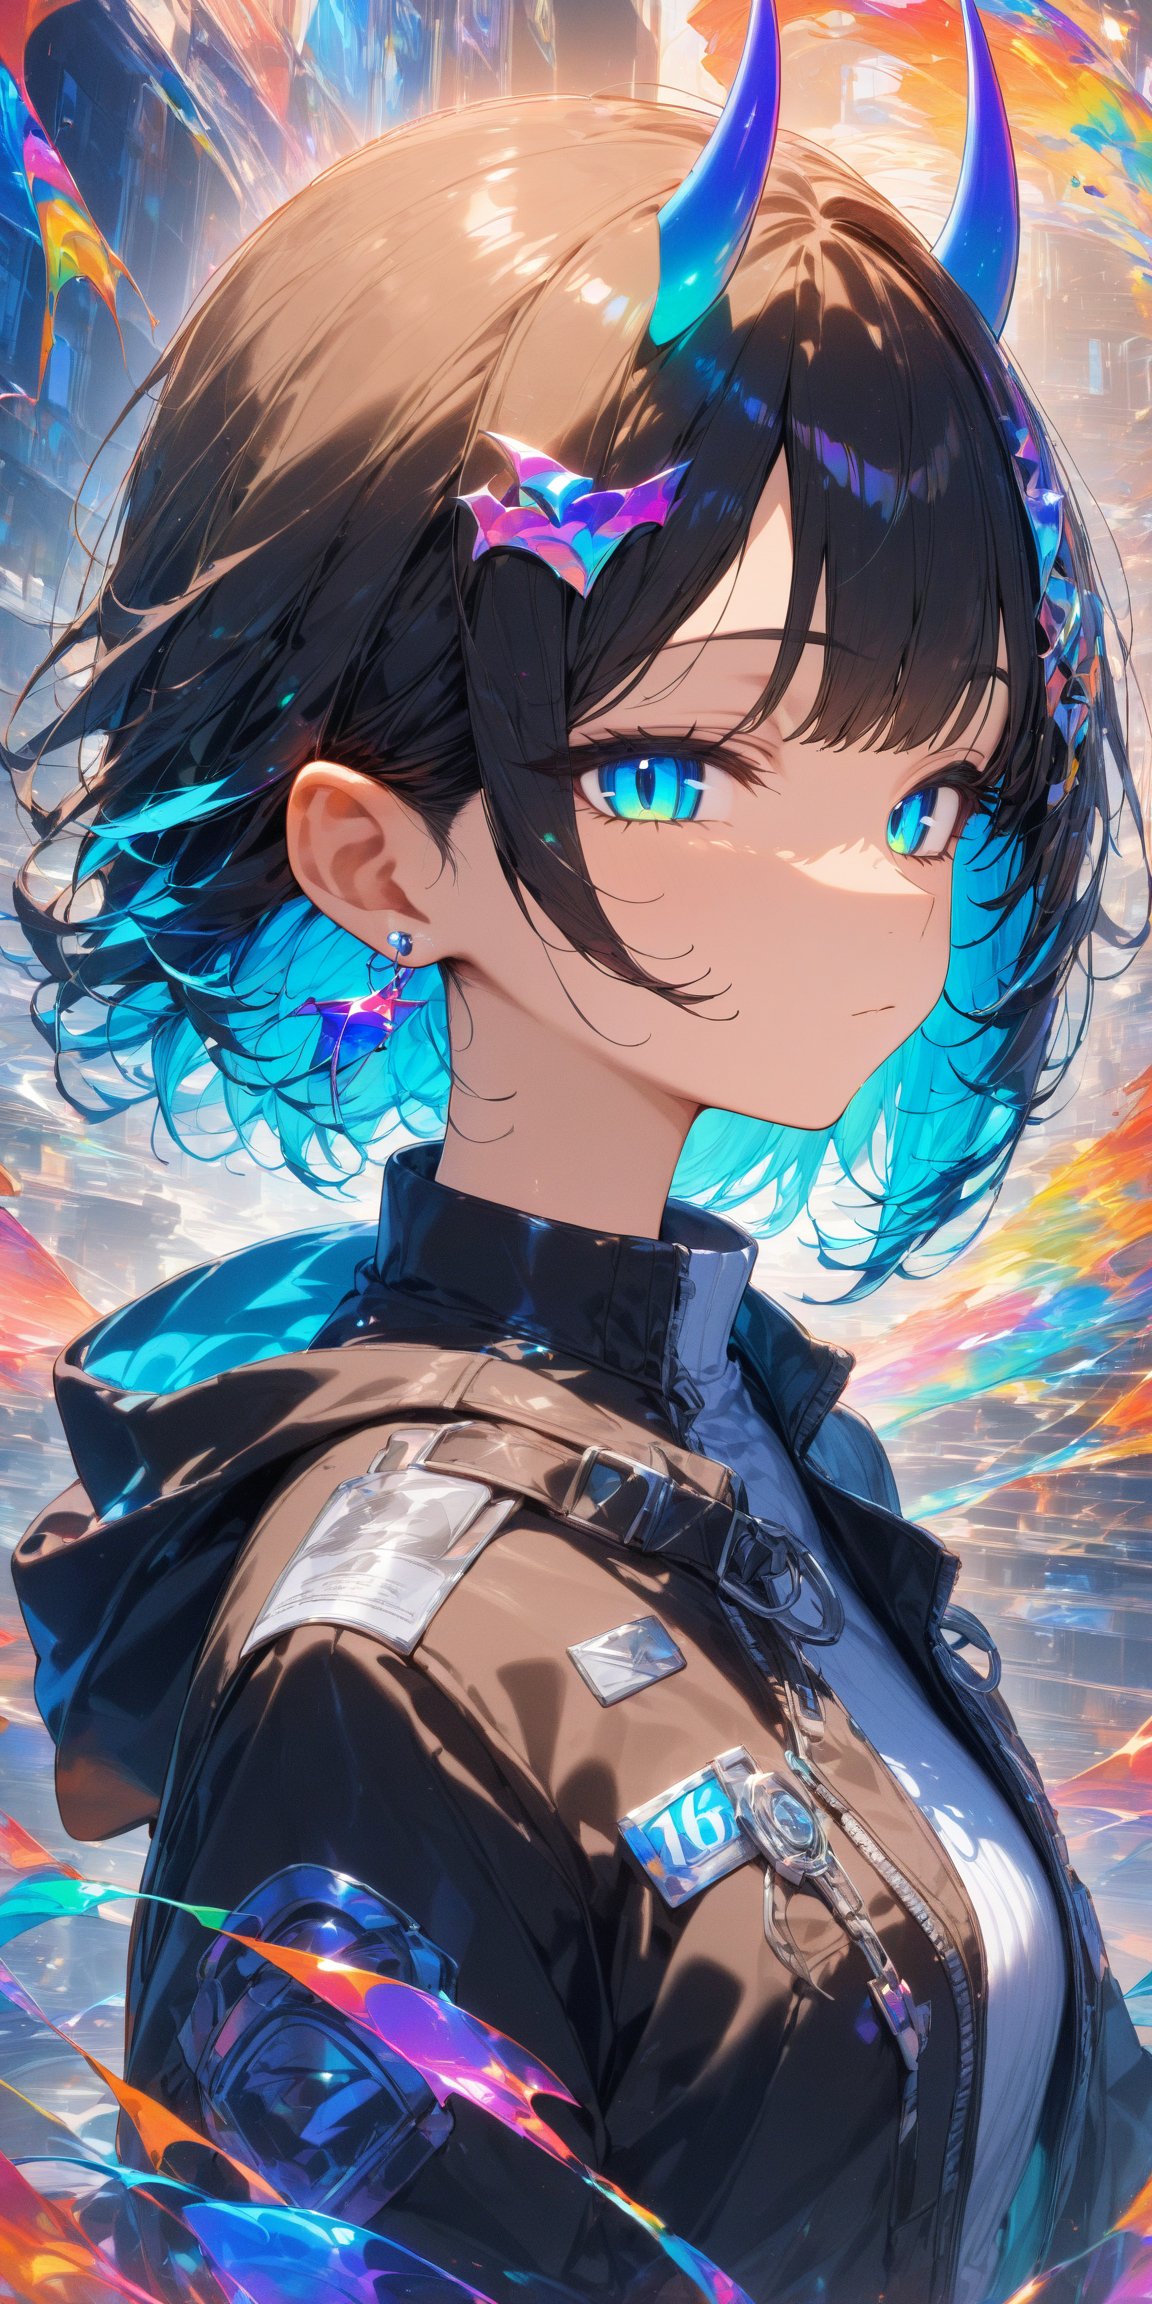 SCORE_9, SCORE_8_UP, SCORE_7_UP, SCORE_6_UP,

MASTERPIECE, BEST QUALITY, HIGH QUALITY, 
HIGHRES, ABSURDRES, PERFECT COMPOSITION,
INTRICATE DETAILS, ULTRA-DETAILED,
PERFECT FACE, PERFECT EYES,
NEWEST, 

rating:safe, 1girl, solo, horns, short_hair, jacket, blue_eyes, black_jacket, bangs, closed_mouth, looking_at_viewer, black_hair, chromatic_aberration, upper_body, expressionless, shirt, jewelry, from_side, earrings, looking_to_the_side, eyebrows_visible_through_hair, ear_piercing, demon_horns, colorful, glitch effect, dark, 